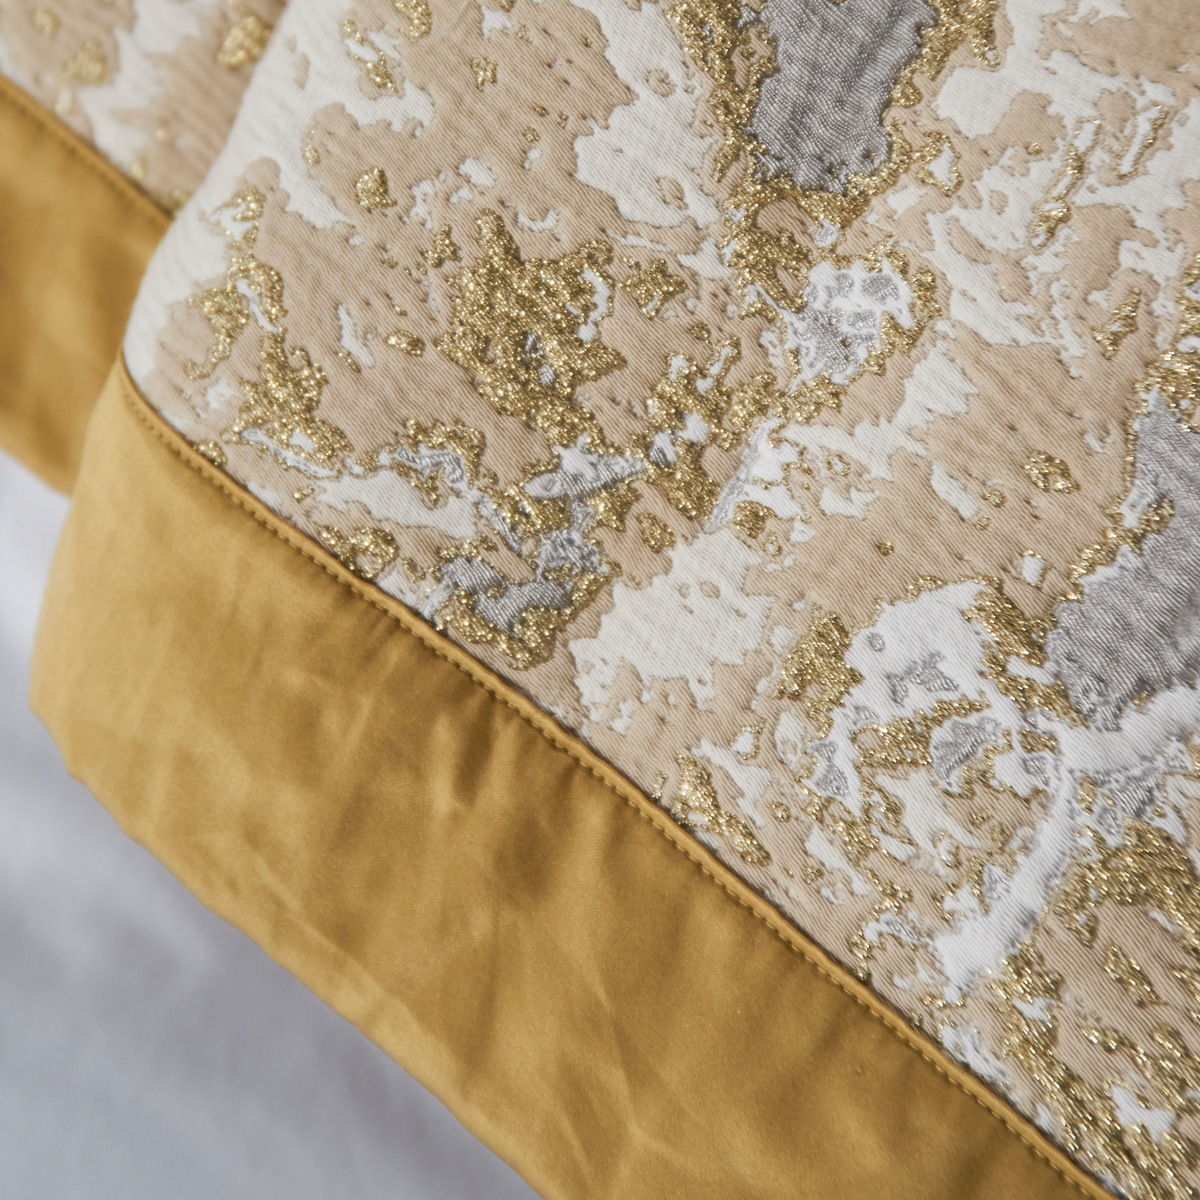 Edge of Bed Cover of Celso de Lemos Waltz Bedding in Miel Color